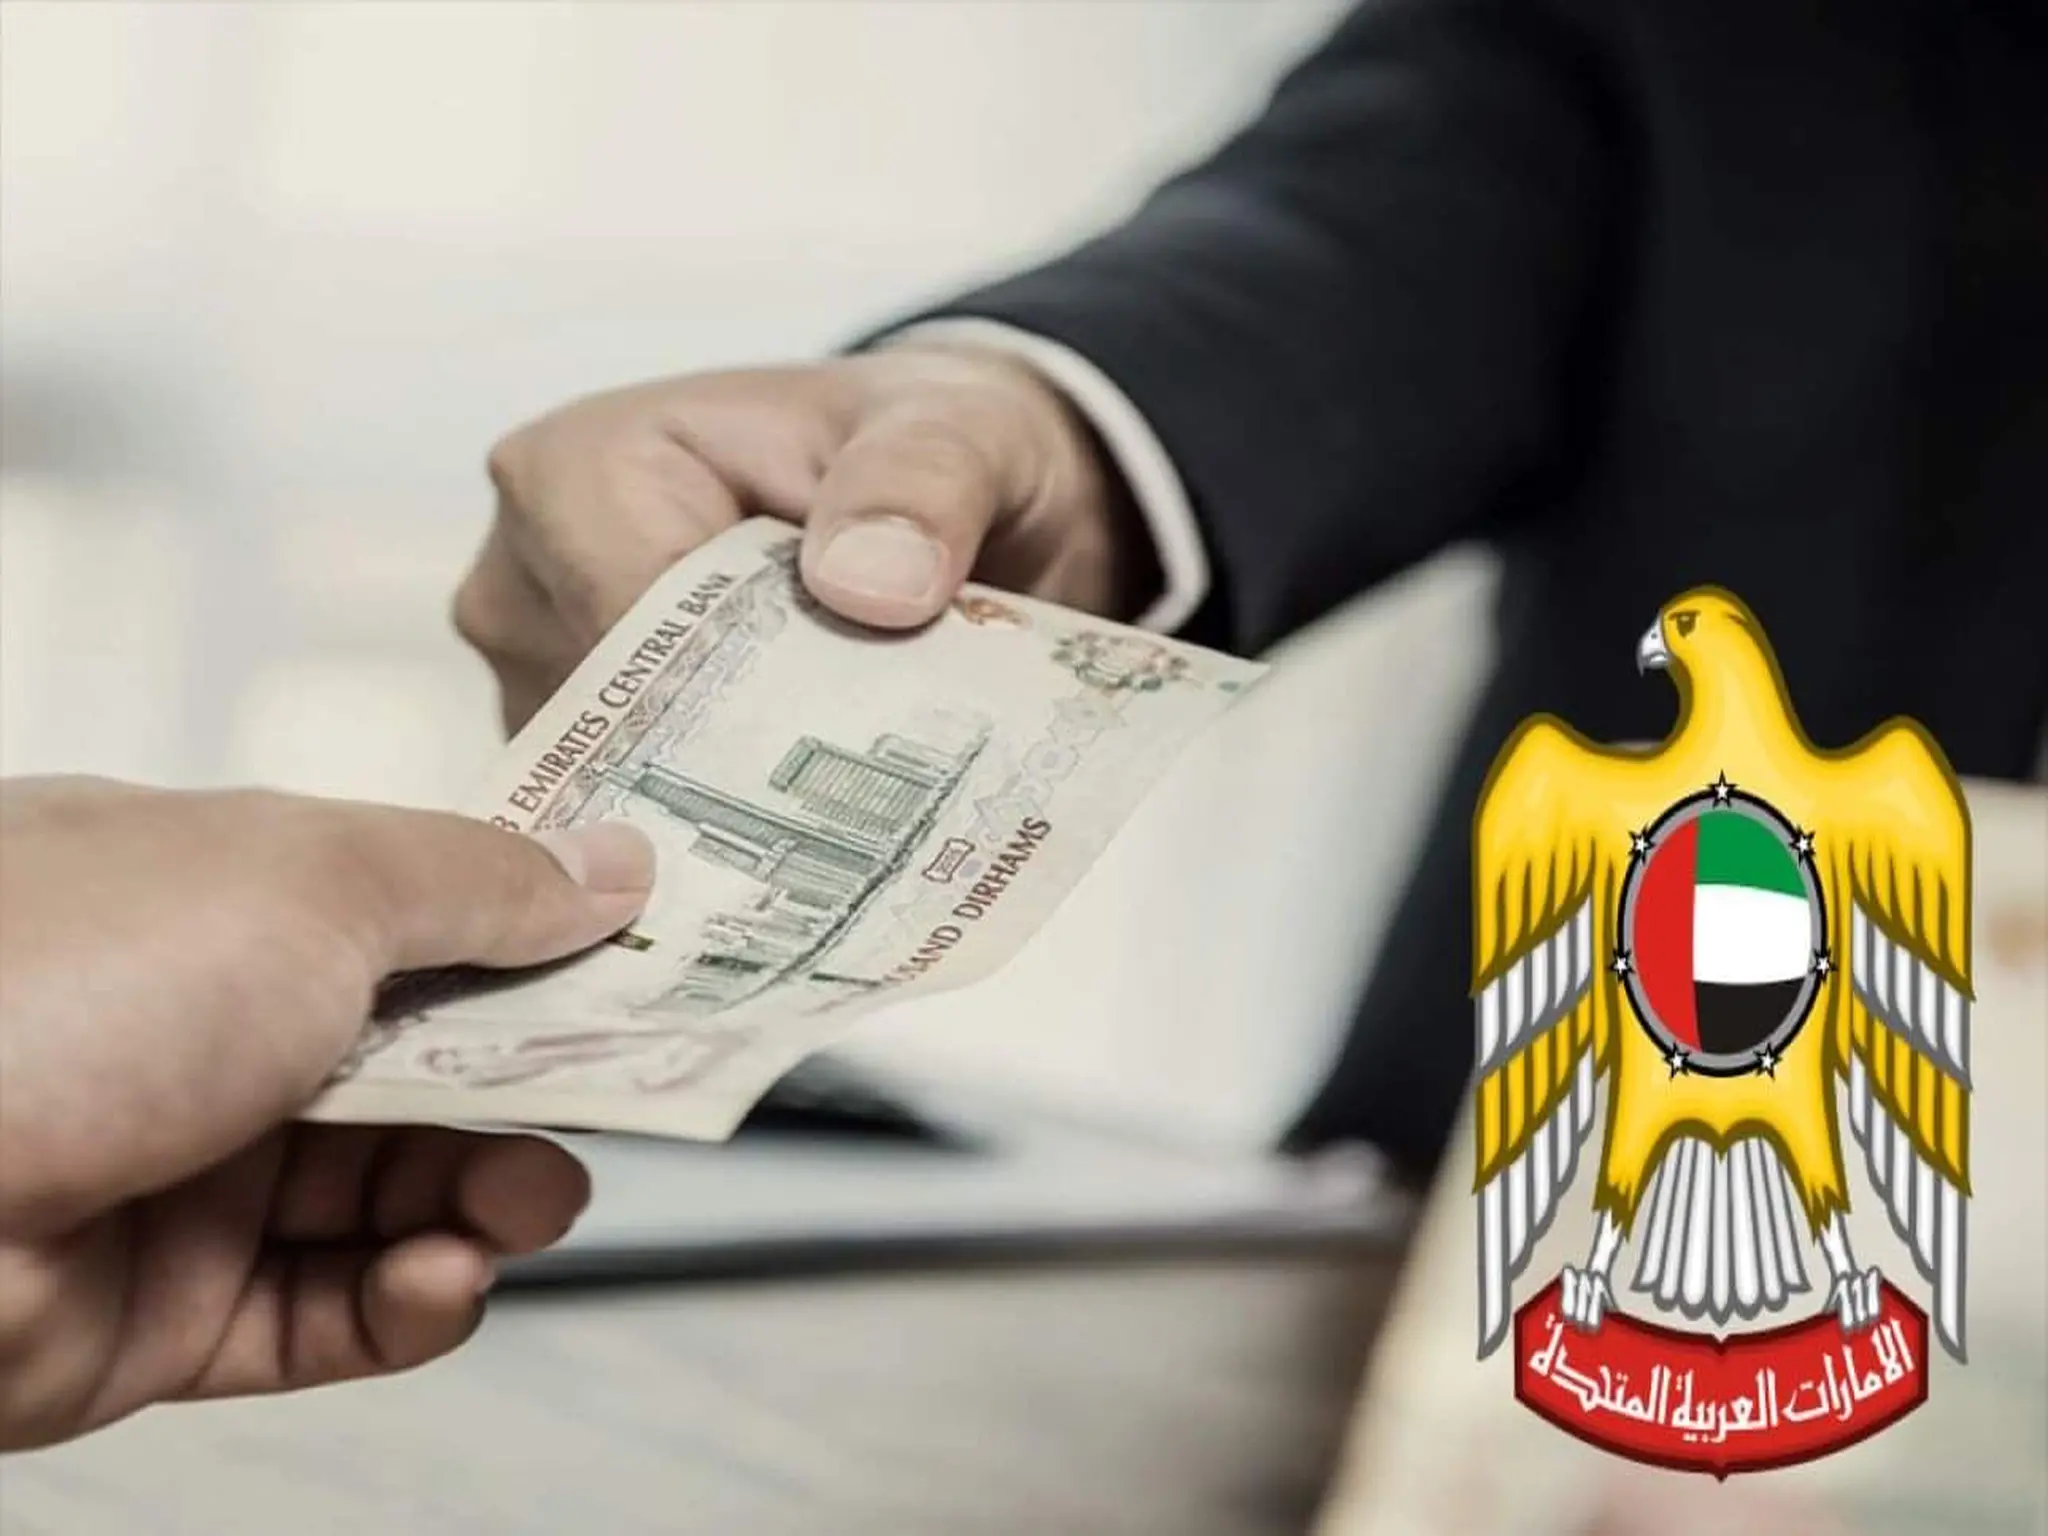 MOHRE UAE: Companies are required not to deduct amounts from employees’ salaries in this case